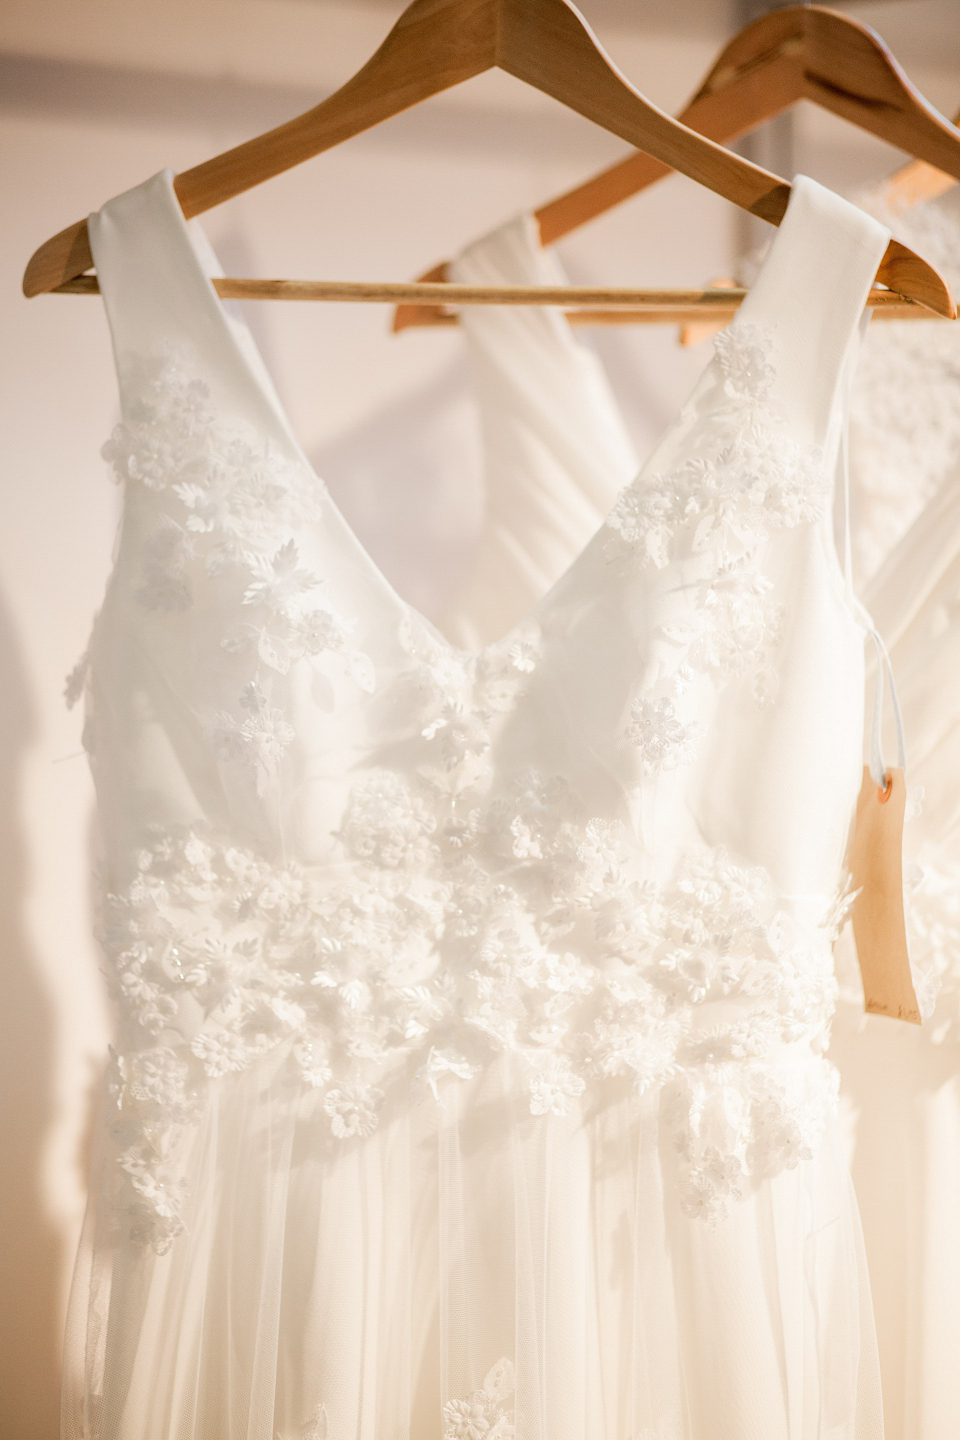 Emma Tindley wedding dresses at The White Gallery, London, April 2014